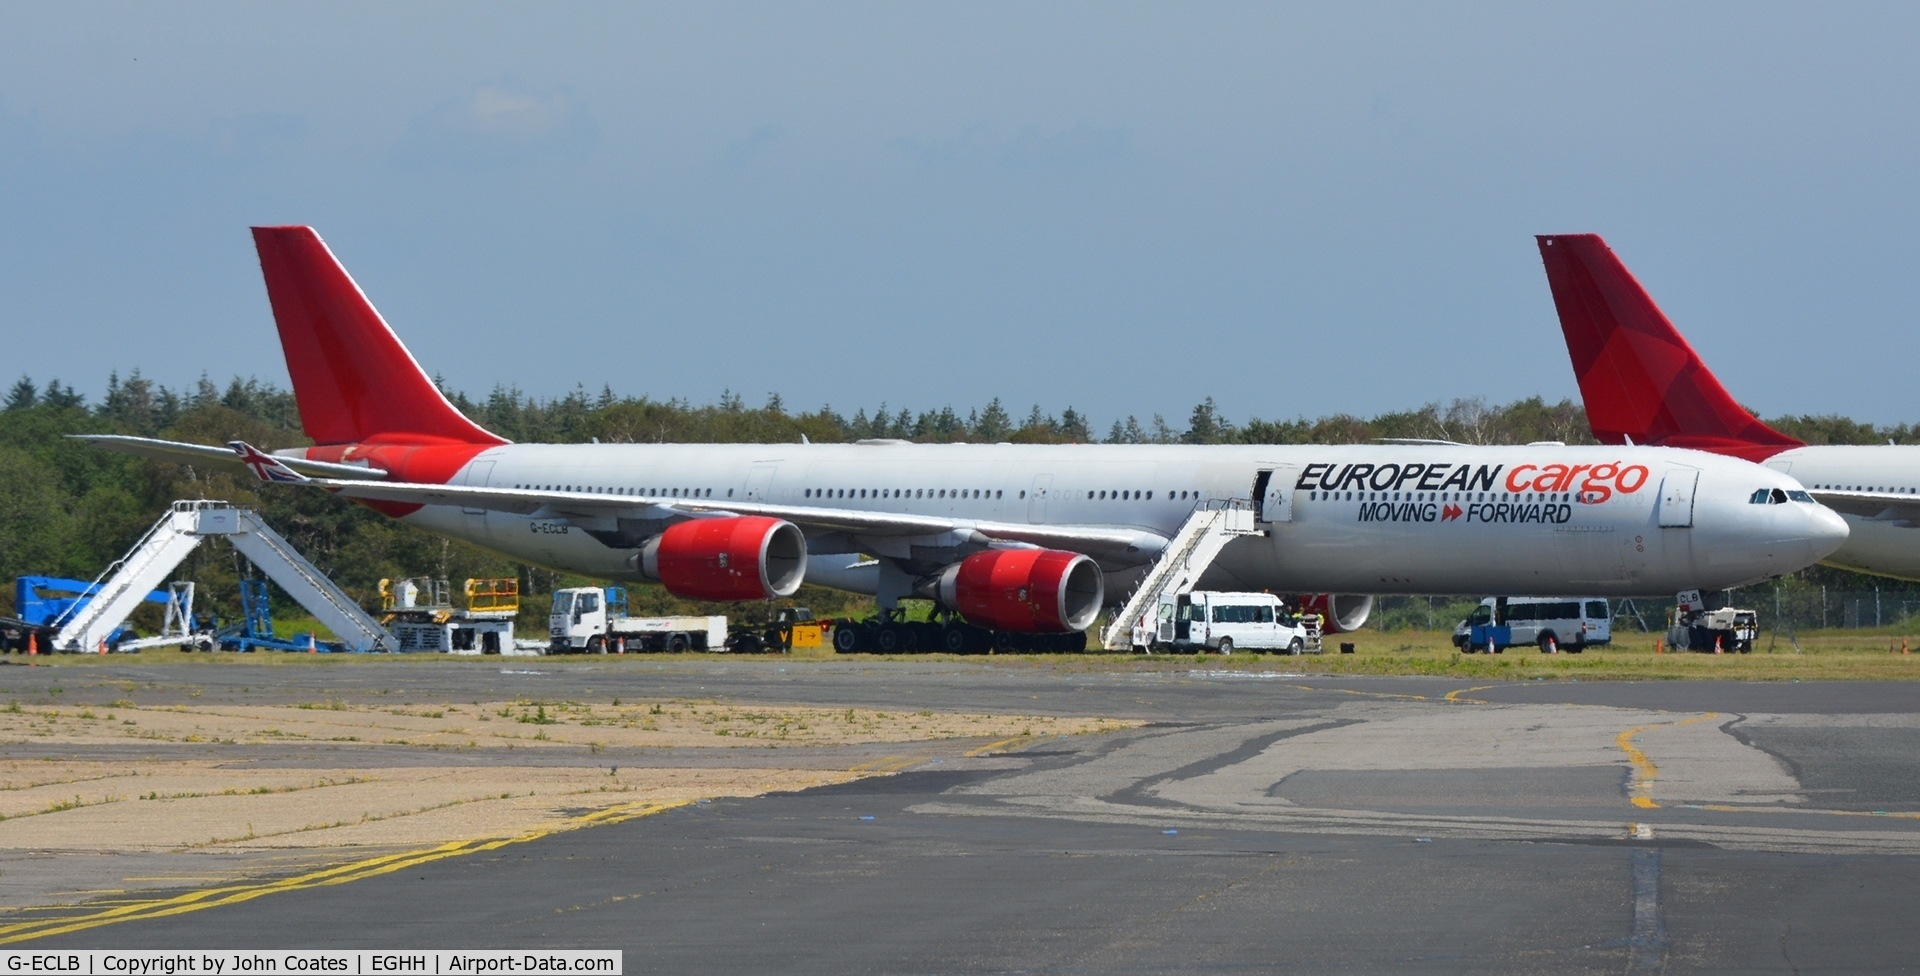 G-ECLB, 2006 Airbus A340-642 C/N 753, At parking